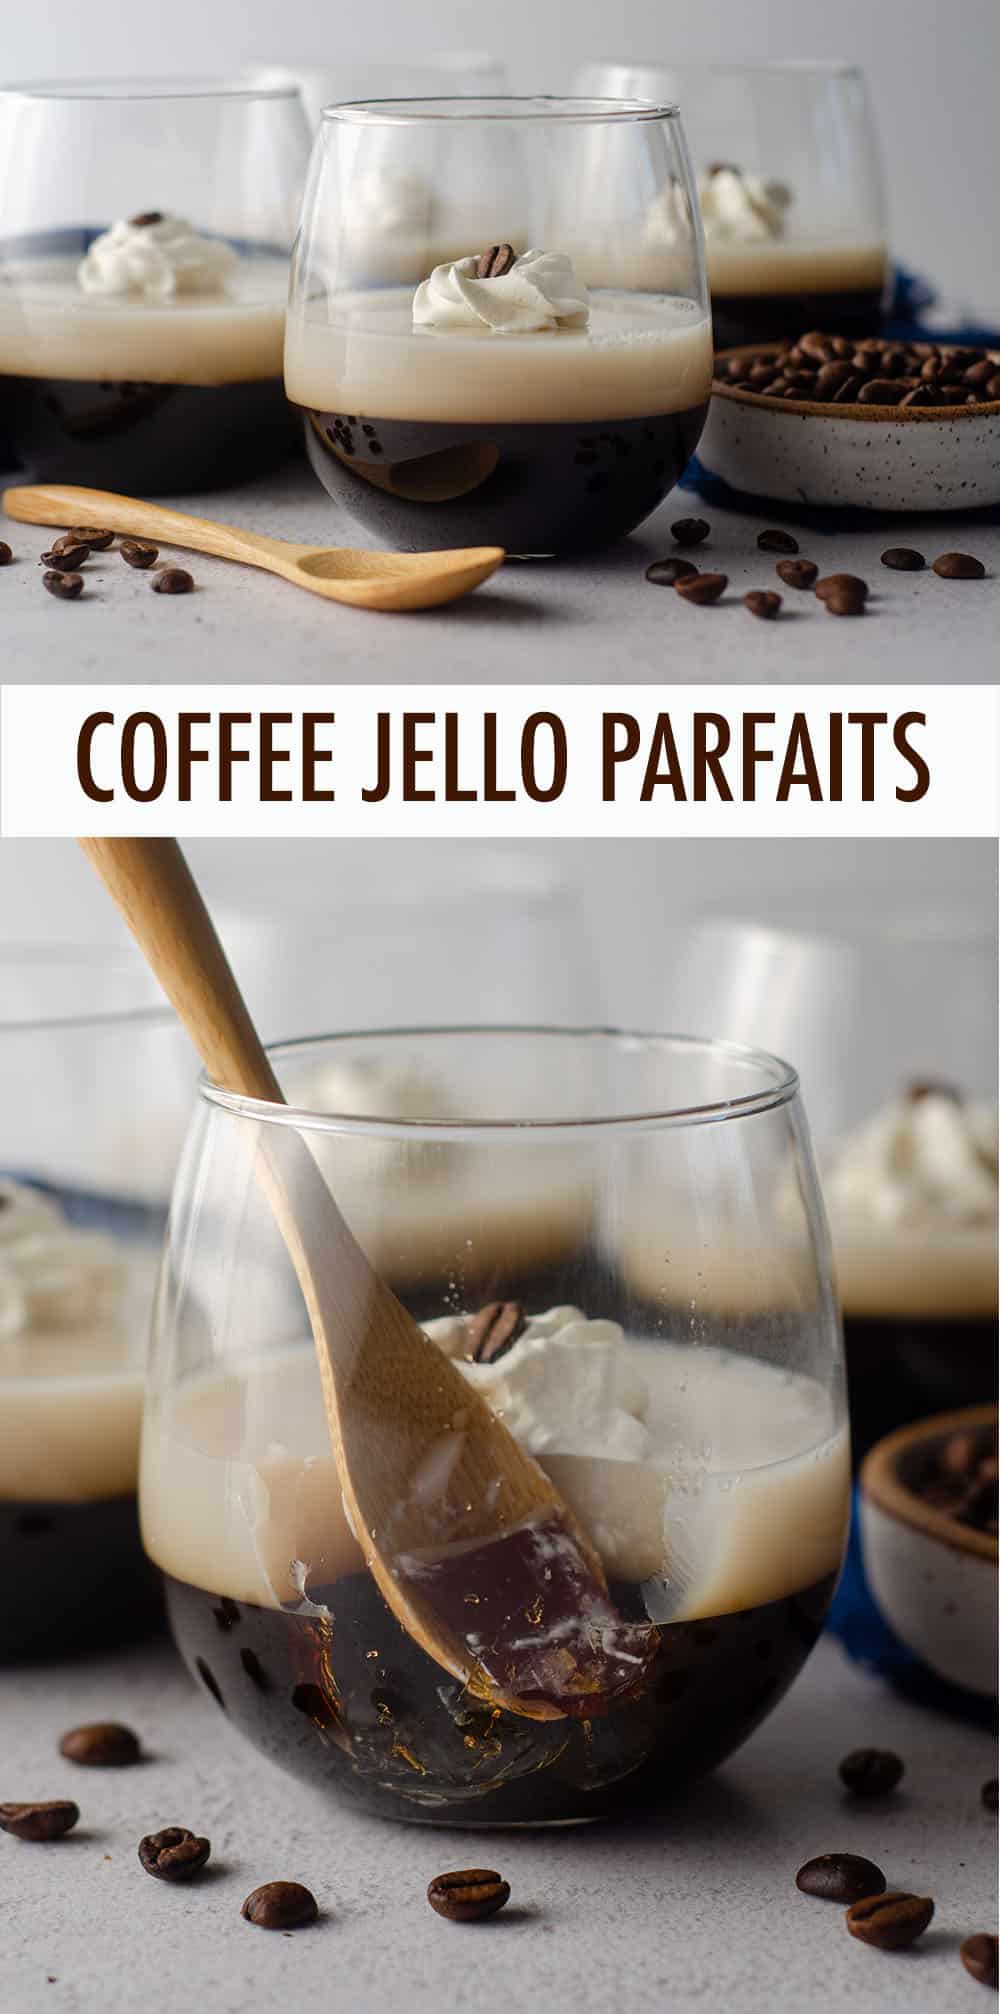 Easy gelatin parfait cups featuring layers of lightly sweetened coffee and rich cream. A creative way to serve coffee after dinner, during the summer, or just any time you're feeling fancy with your cup of Joe! via @frshaprilflours